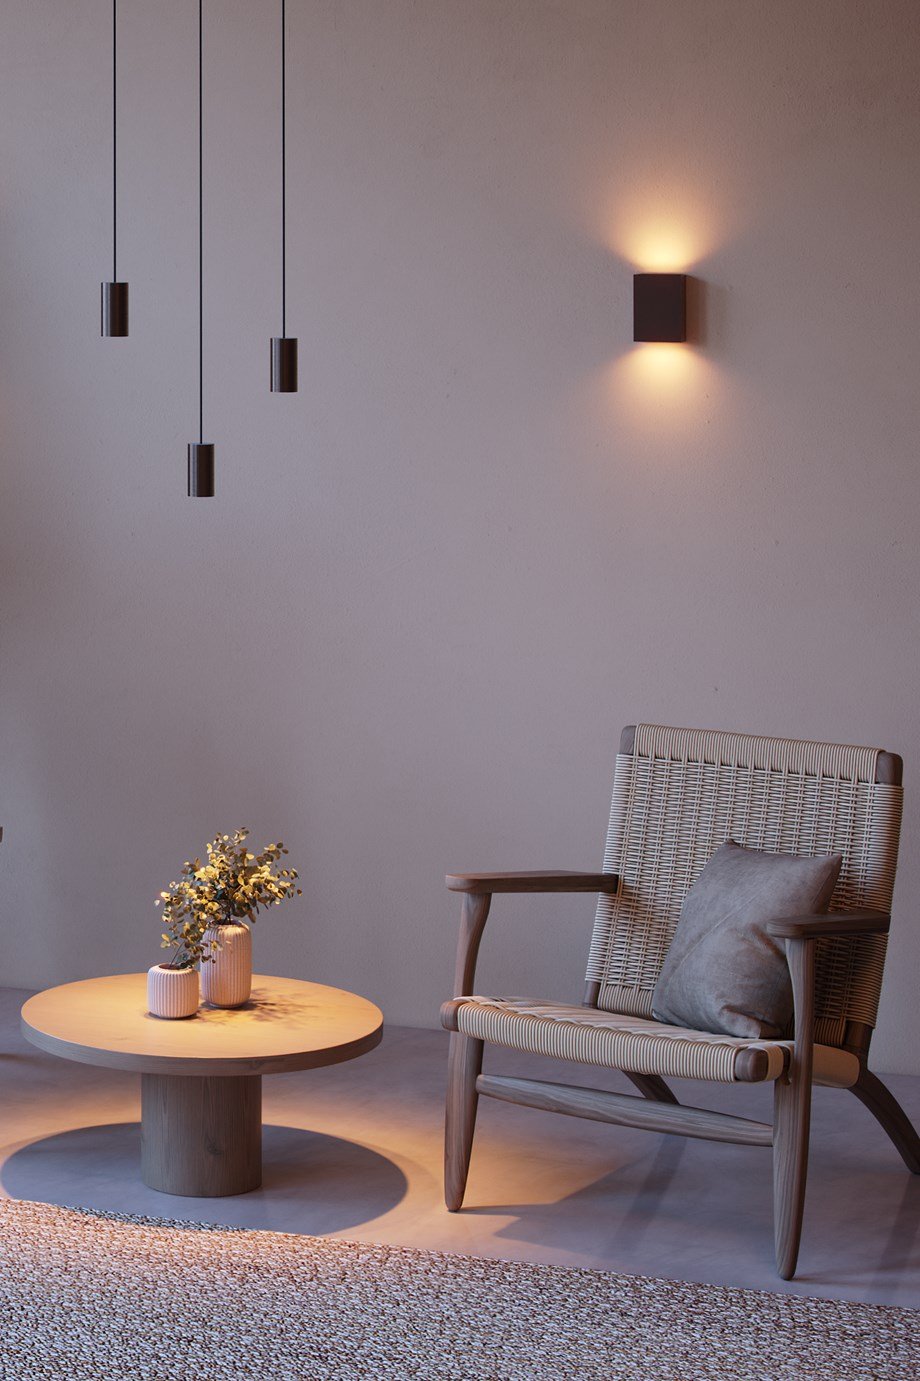 Pendant and wall lighting combined in sitting area